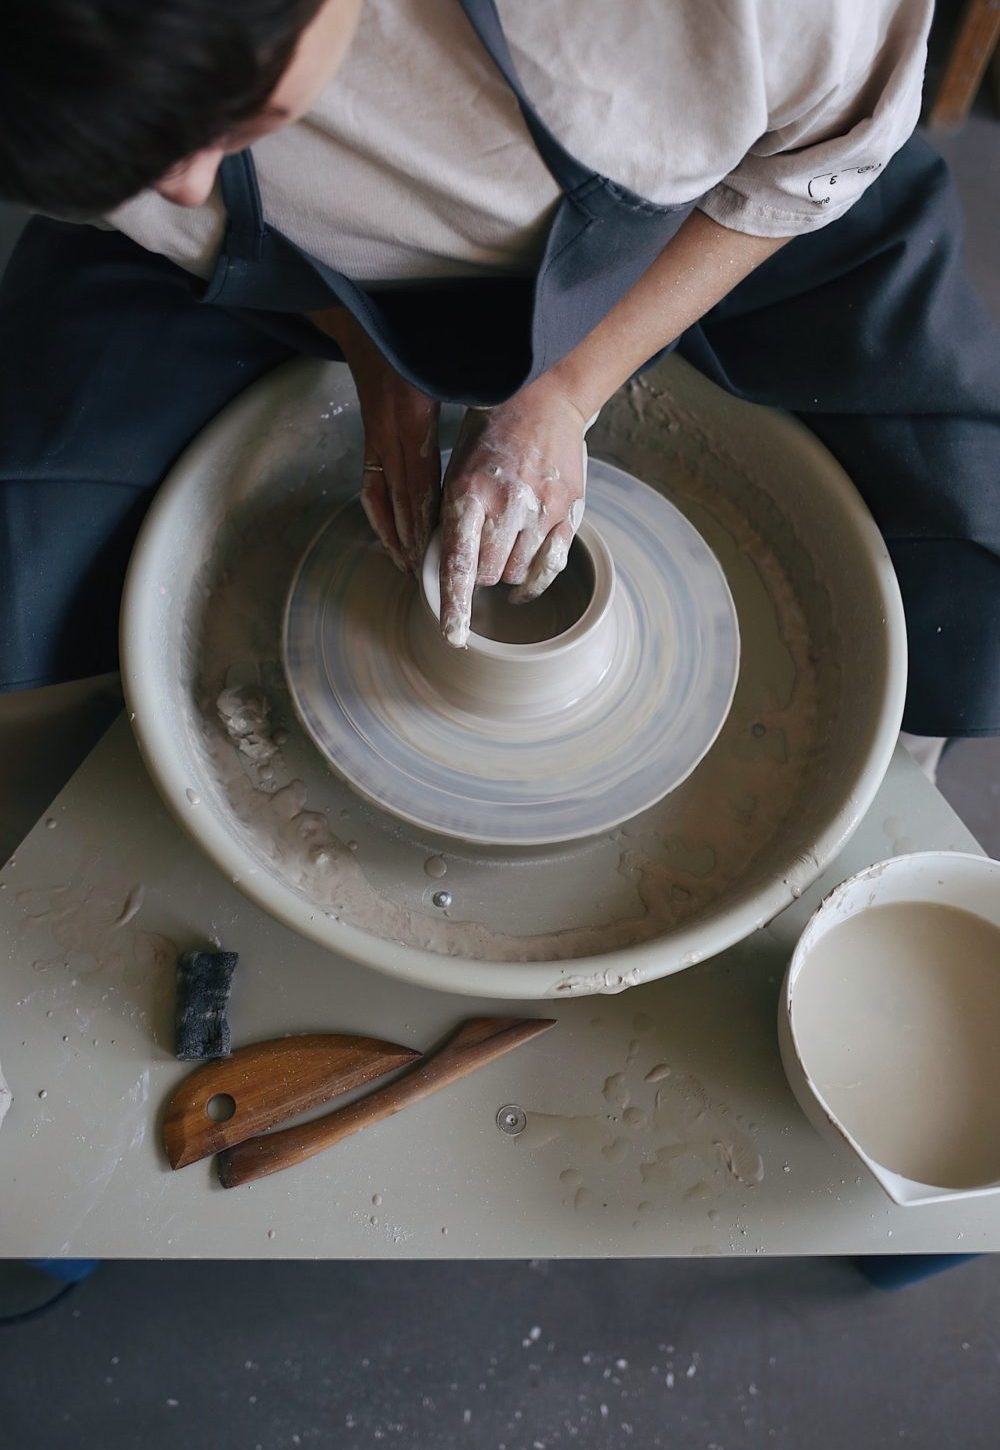 Working on a potter's wheel with a clay in a pottery studio. Clay jug